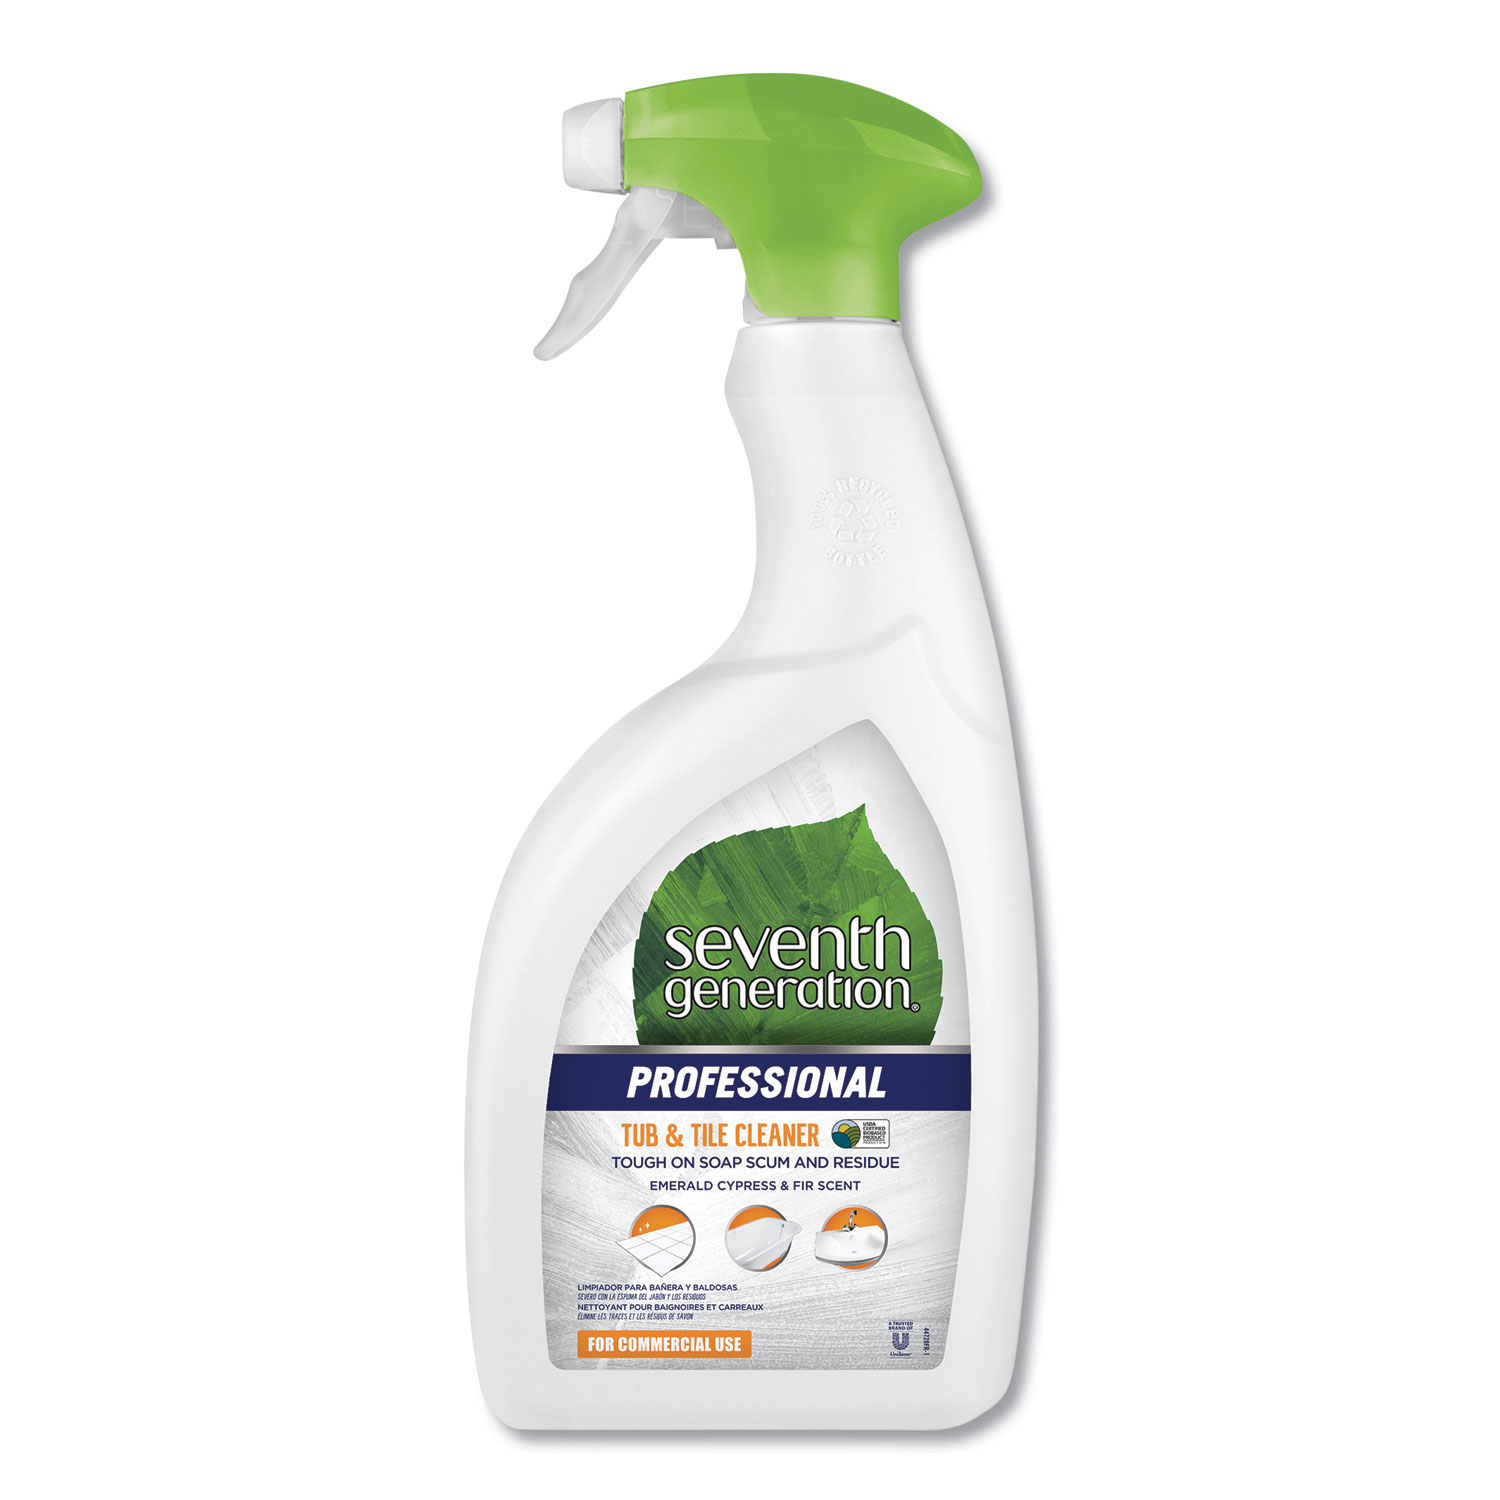  Seventh Generation Professional 44728 Tub and Tile Cleaner, Emerald Cypress and Fir, 32 oz Spray Bottle, 8/Carton (SEV44728CT) 